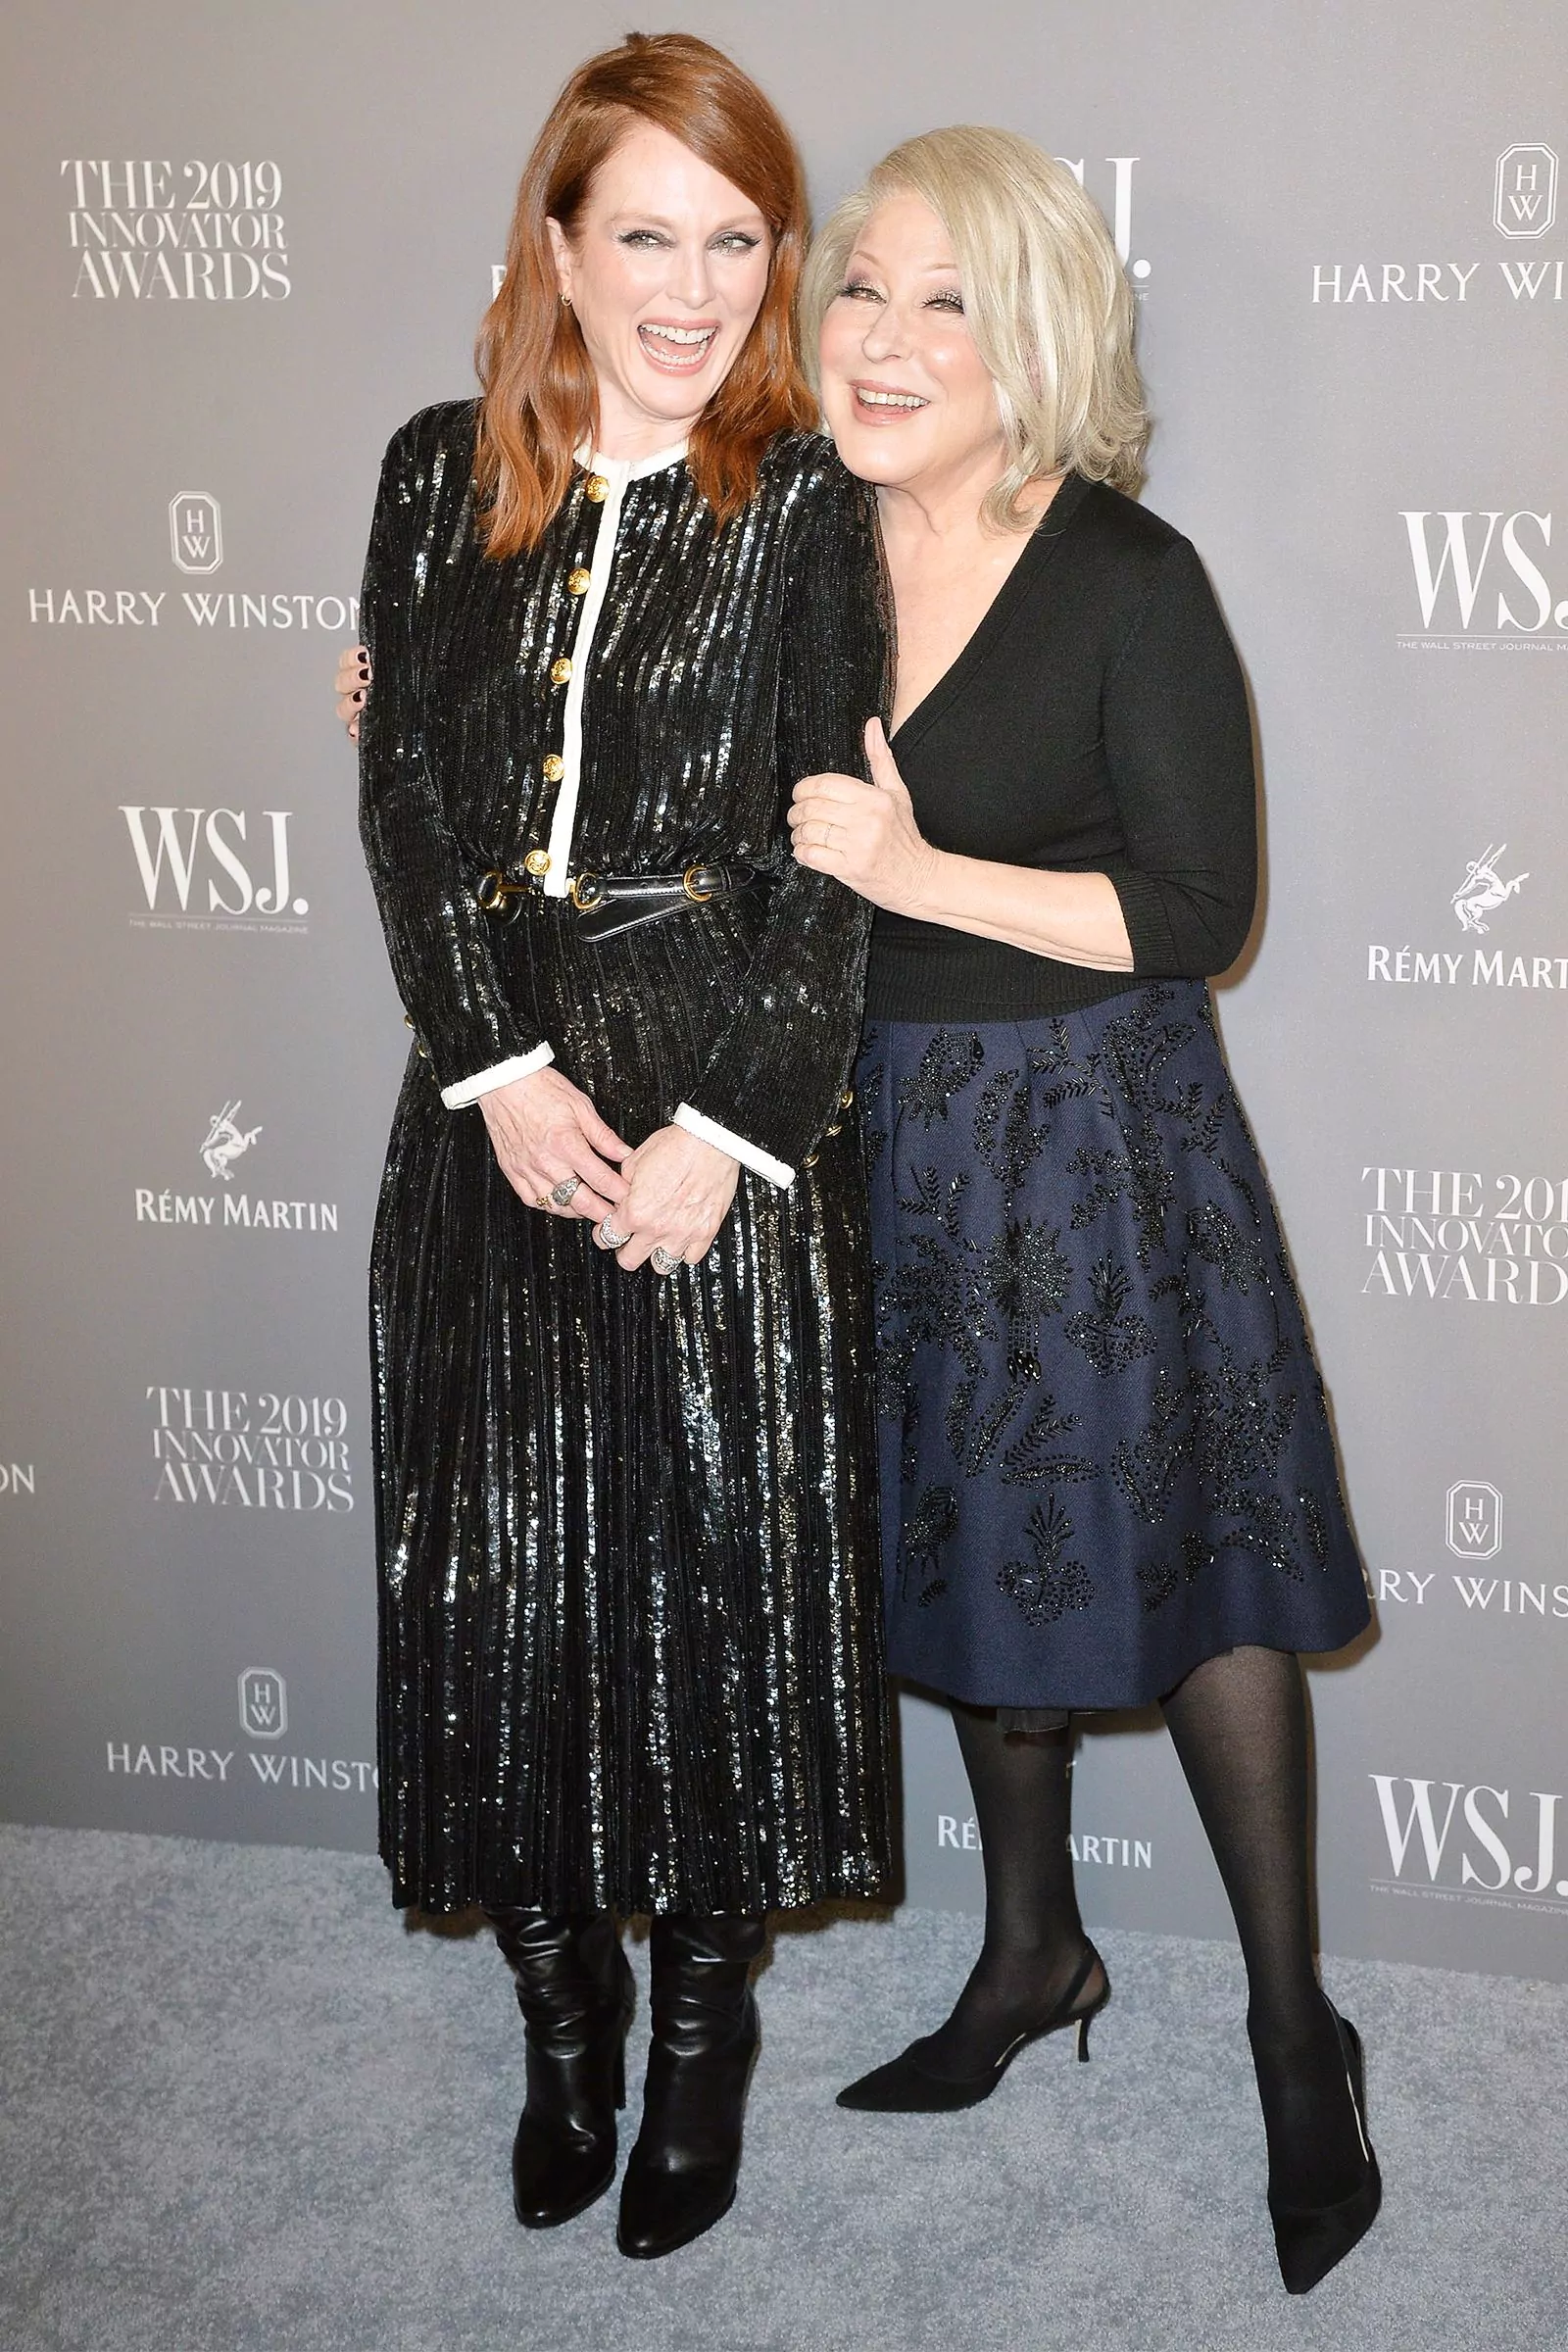 Julianne Moore and Bette Midler attend the 2019 Wall Street Journal Awards in New York City on November 6, 2019.